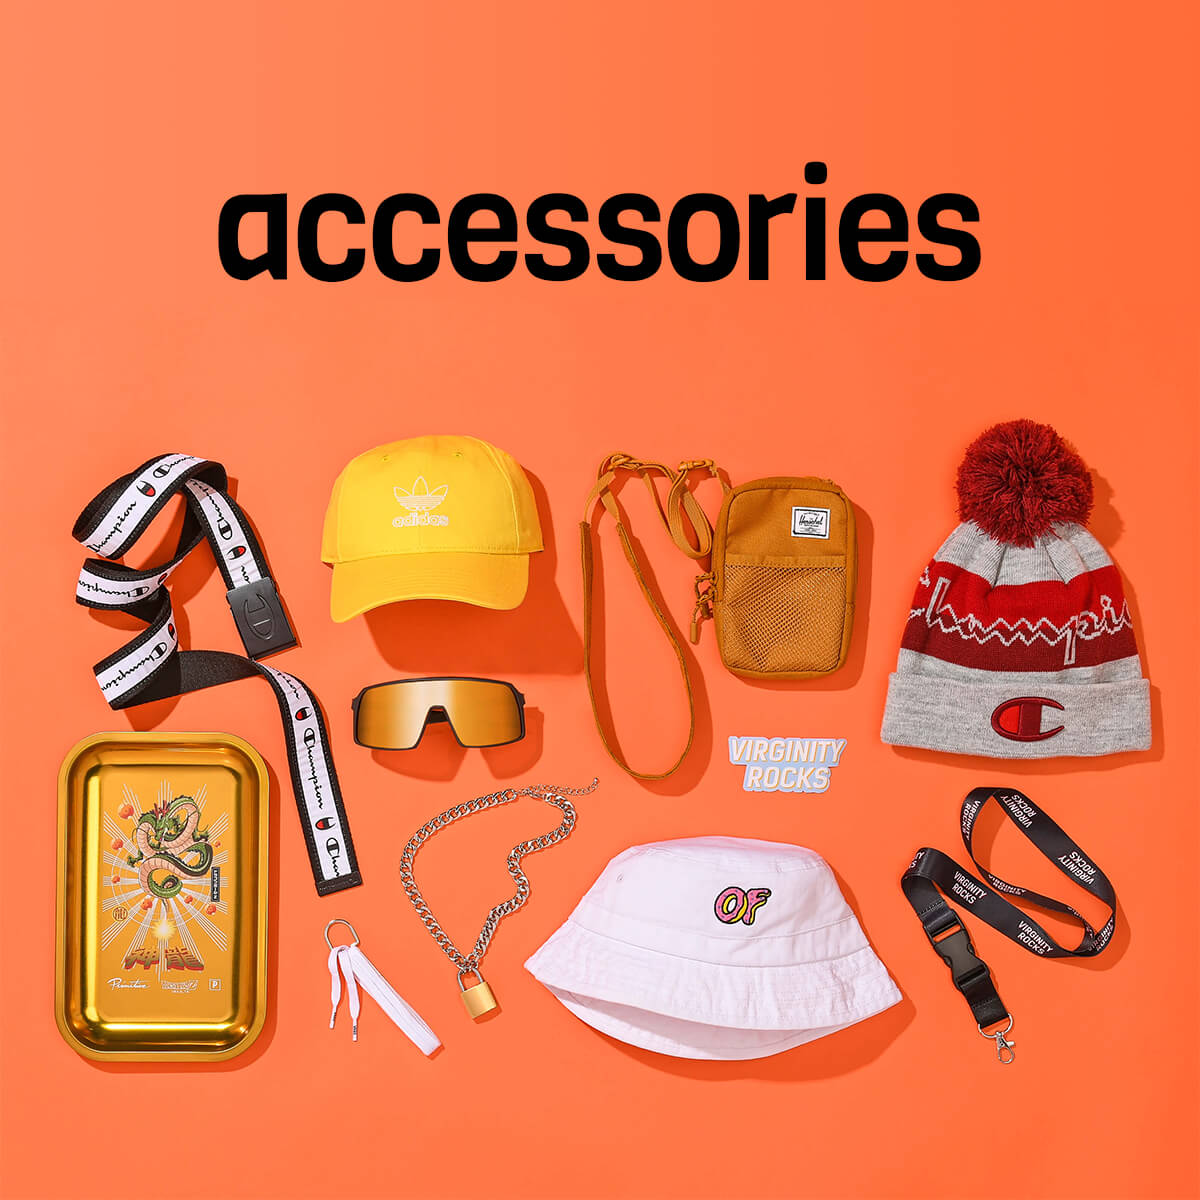 GIFT ACCESSORIES